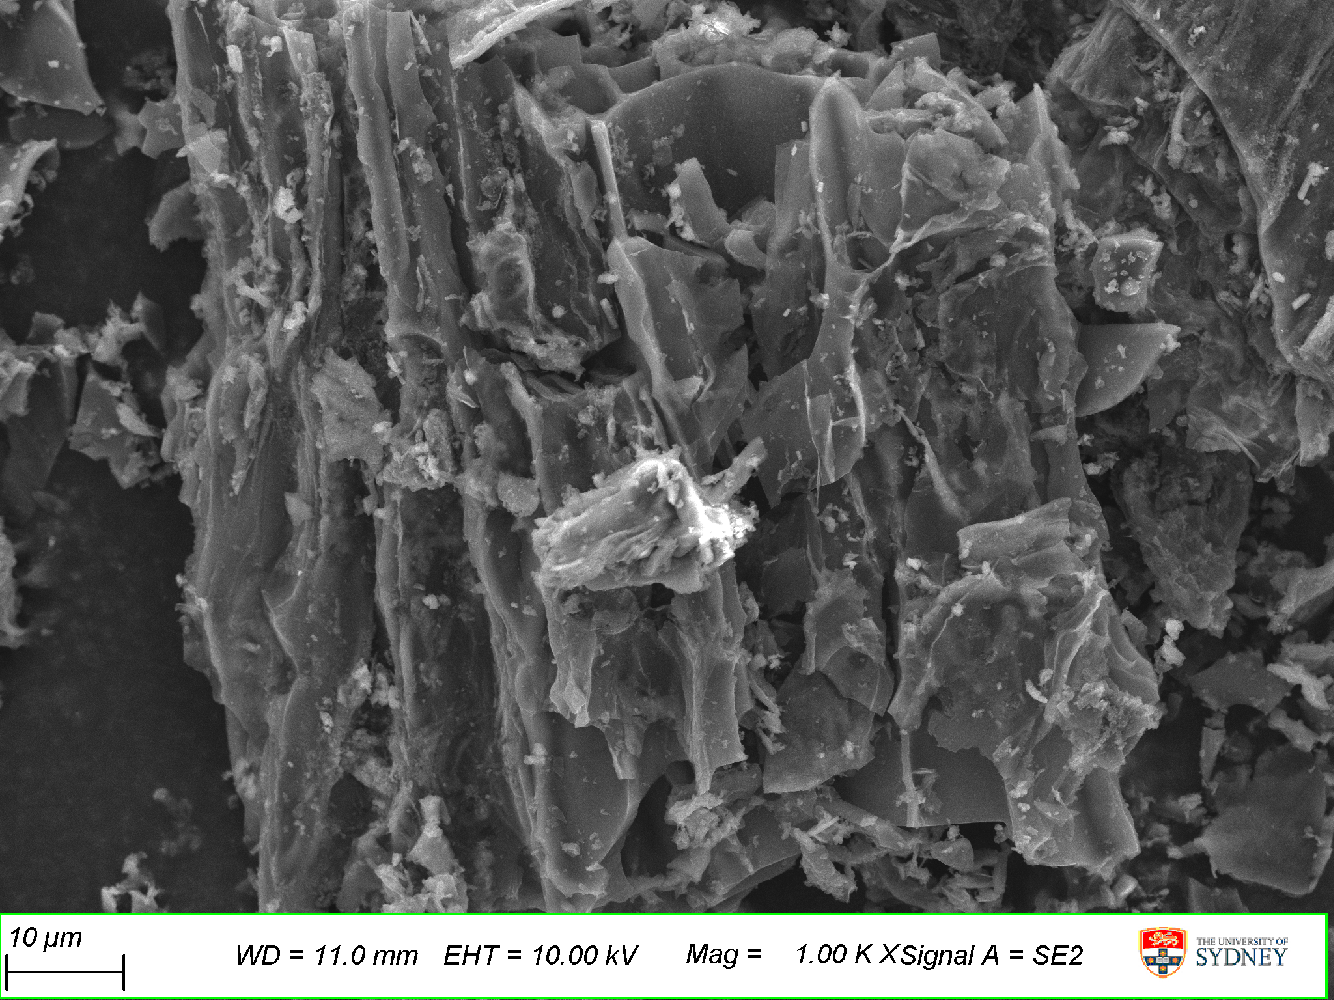 Scanning electron micrograph of durian aerogel side wall